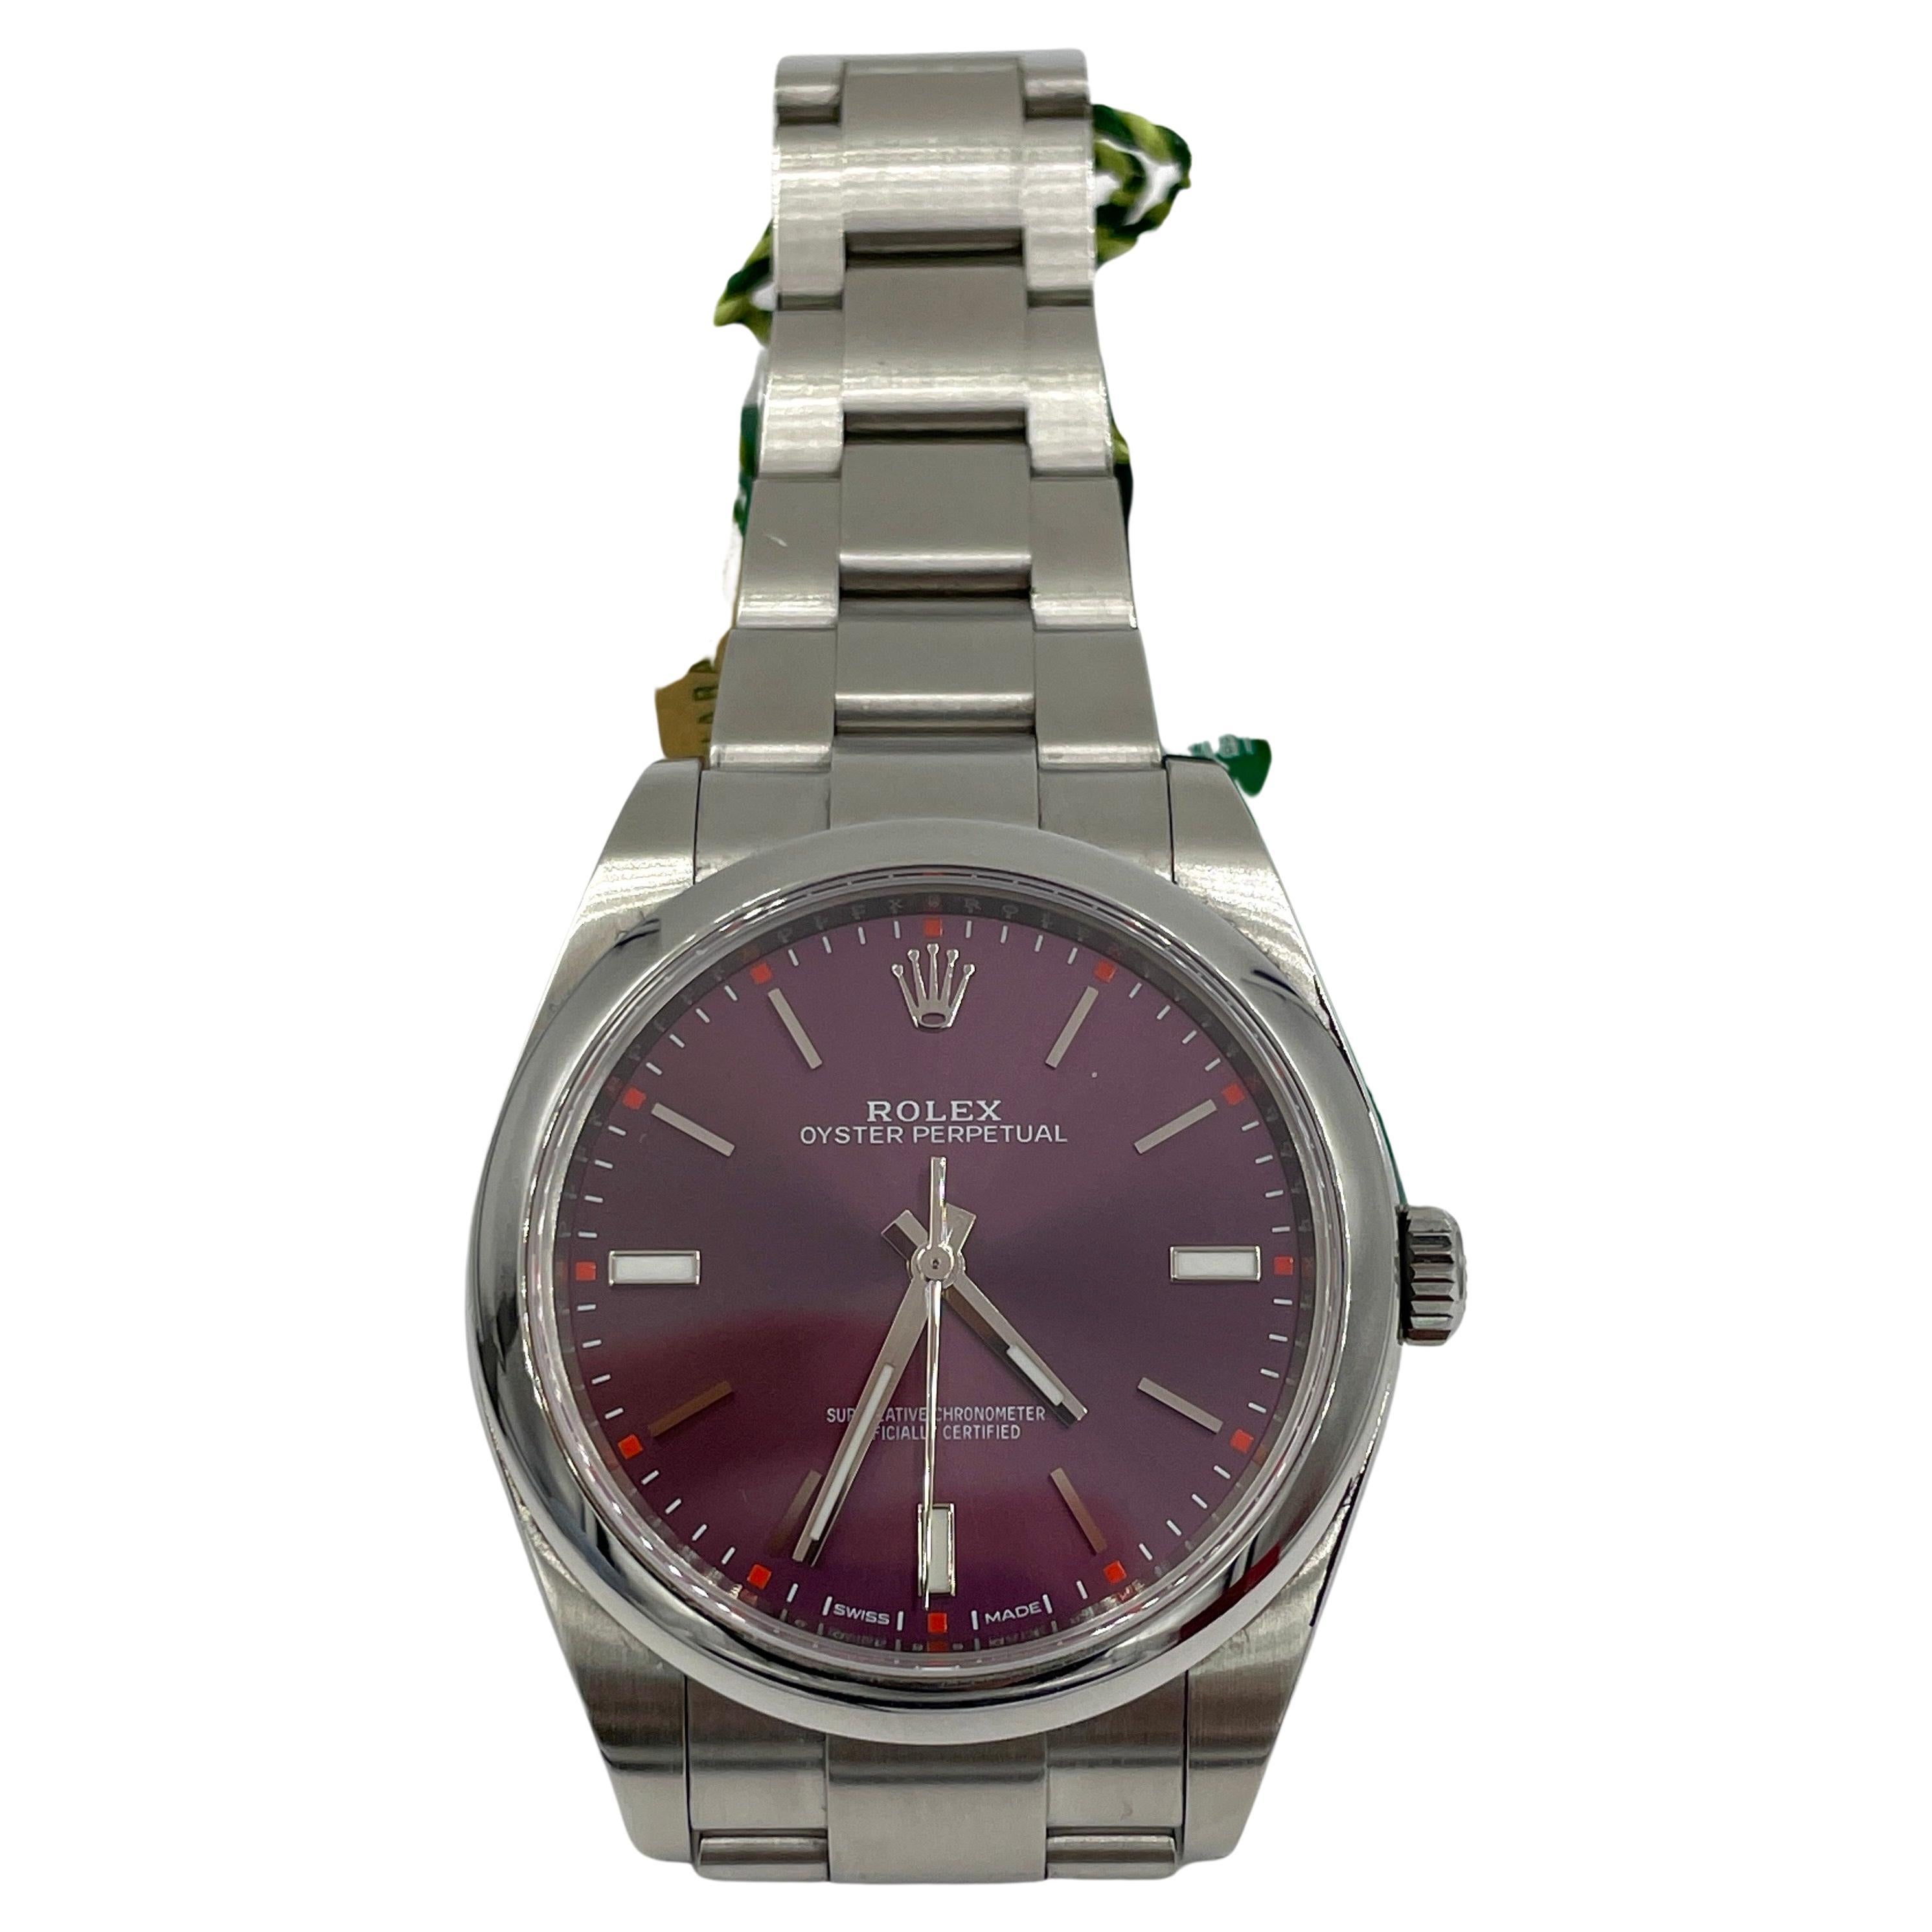 Rolex Oyster Perpetual 39mm Grape Dial stainless steel wristwatch,  2020  
Watch reference:  114300

This is a very sought-after watch in very good condition.  Gently worn with minor scratches.

MEASUREMENTS: Watch case 39 mm 

SIZE:  Fits up to a